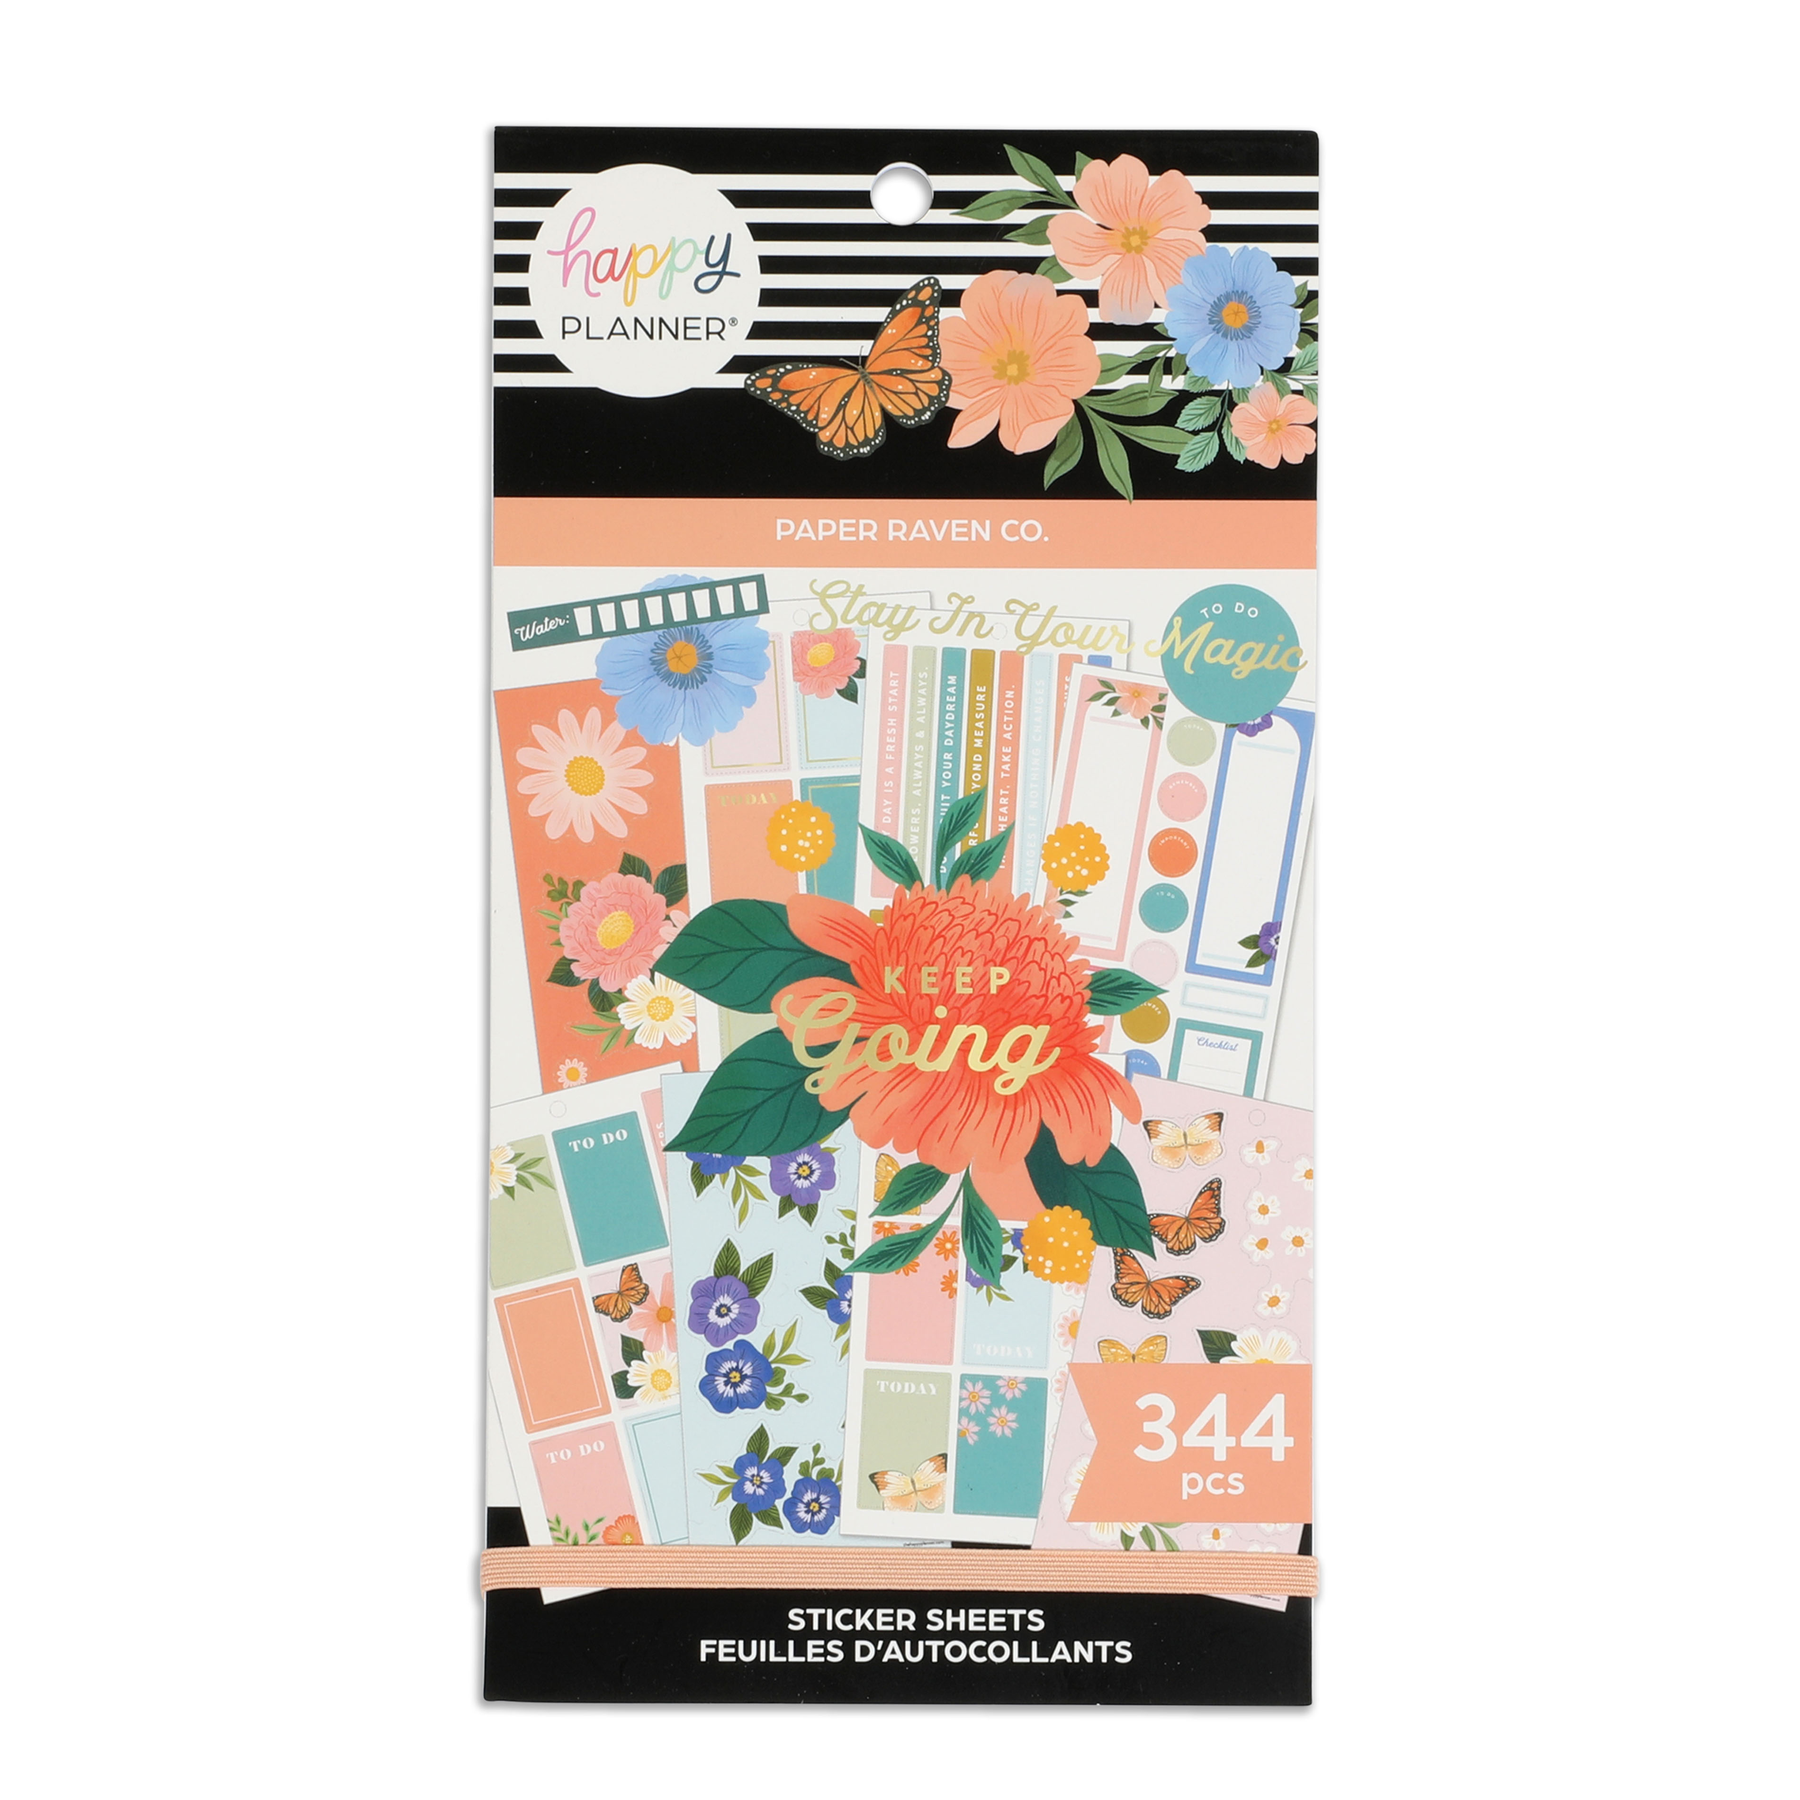 Dear Lizzy Stay Colorful Paper Pack 3